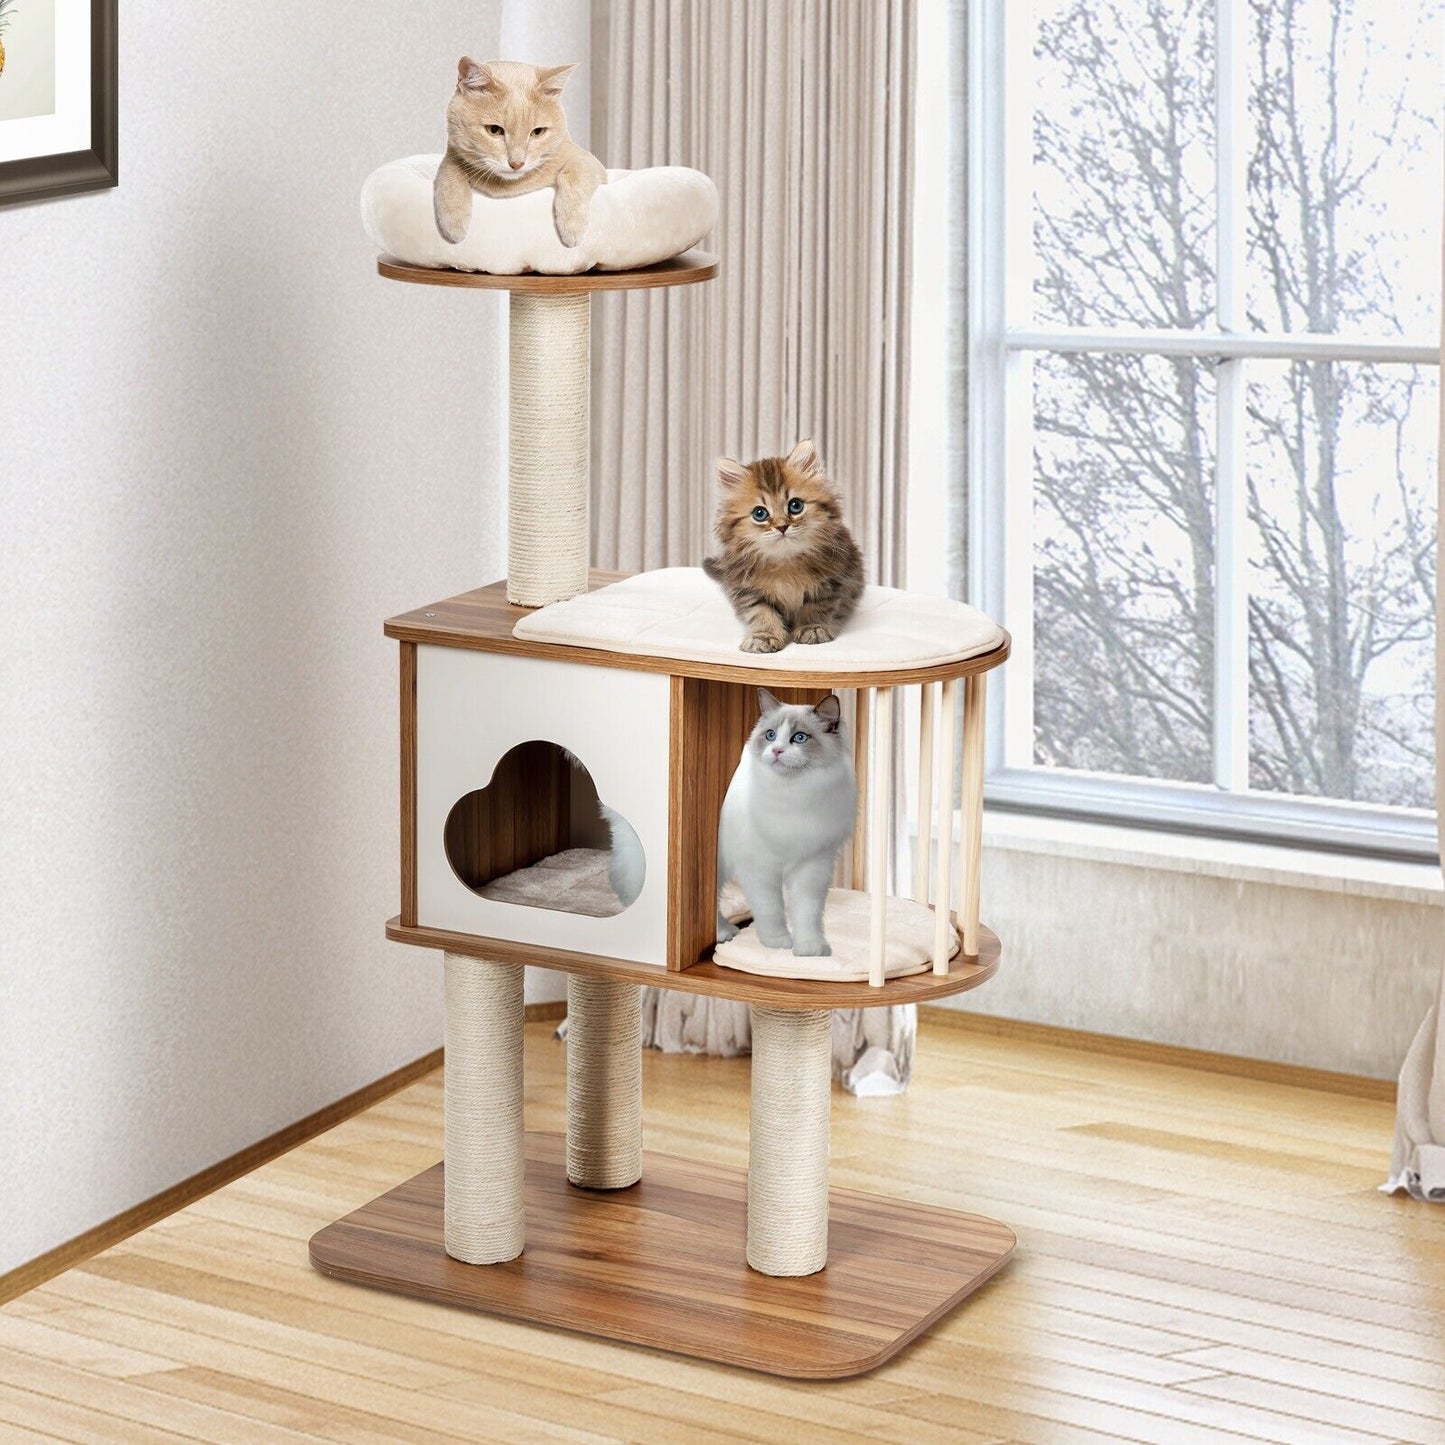 Cat Tree Tower Scratching Posts Kitty Playhouse Climbing Condo Stand Furniture